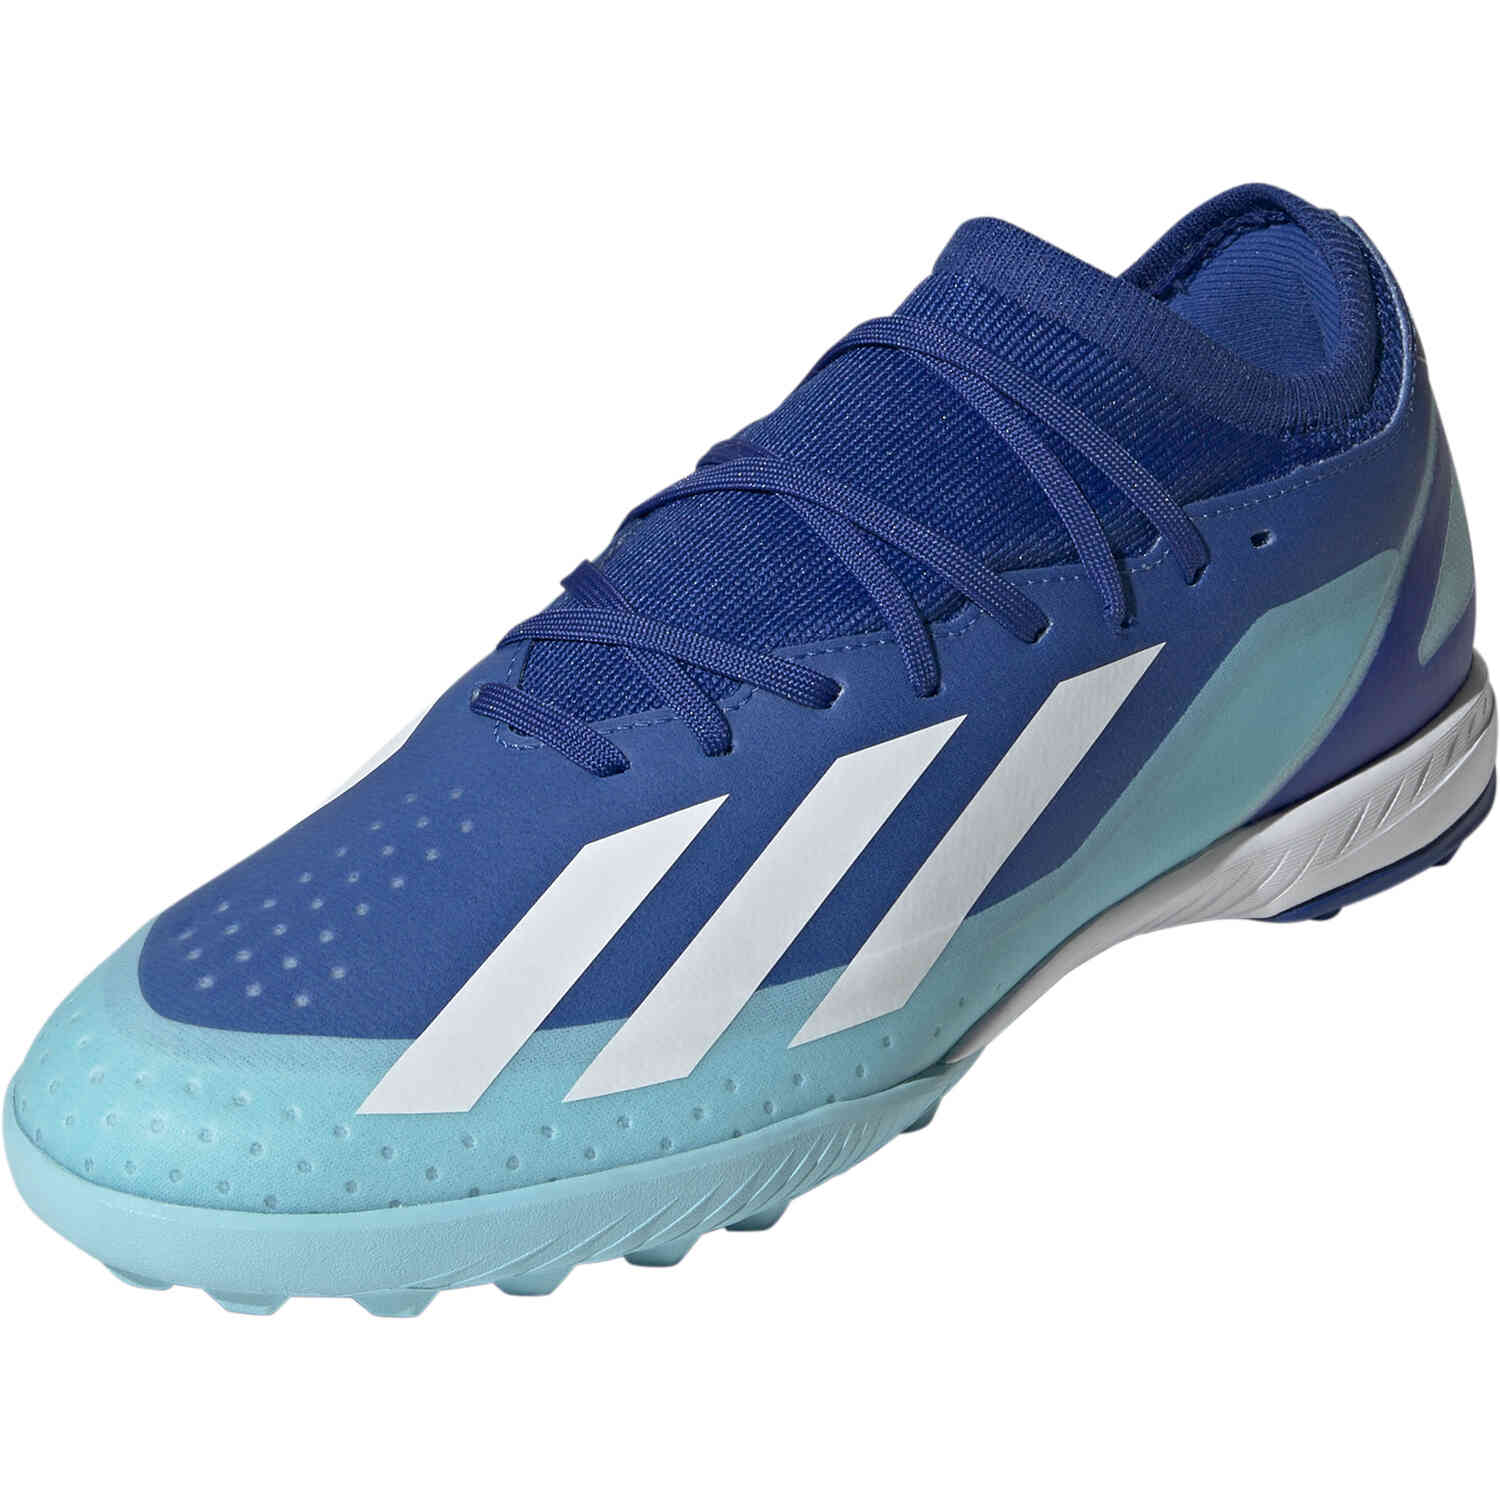 Red White Bright TF Soccer - Turf X Crazyfast.3 Royal, Master Solar adidas & - Soccer Shoes